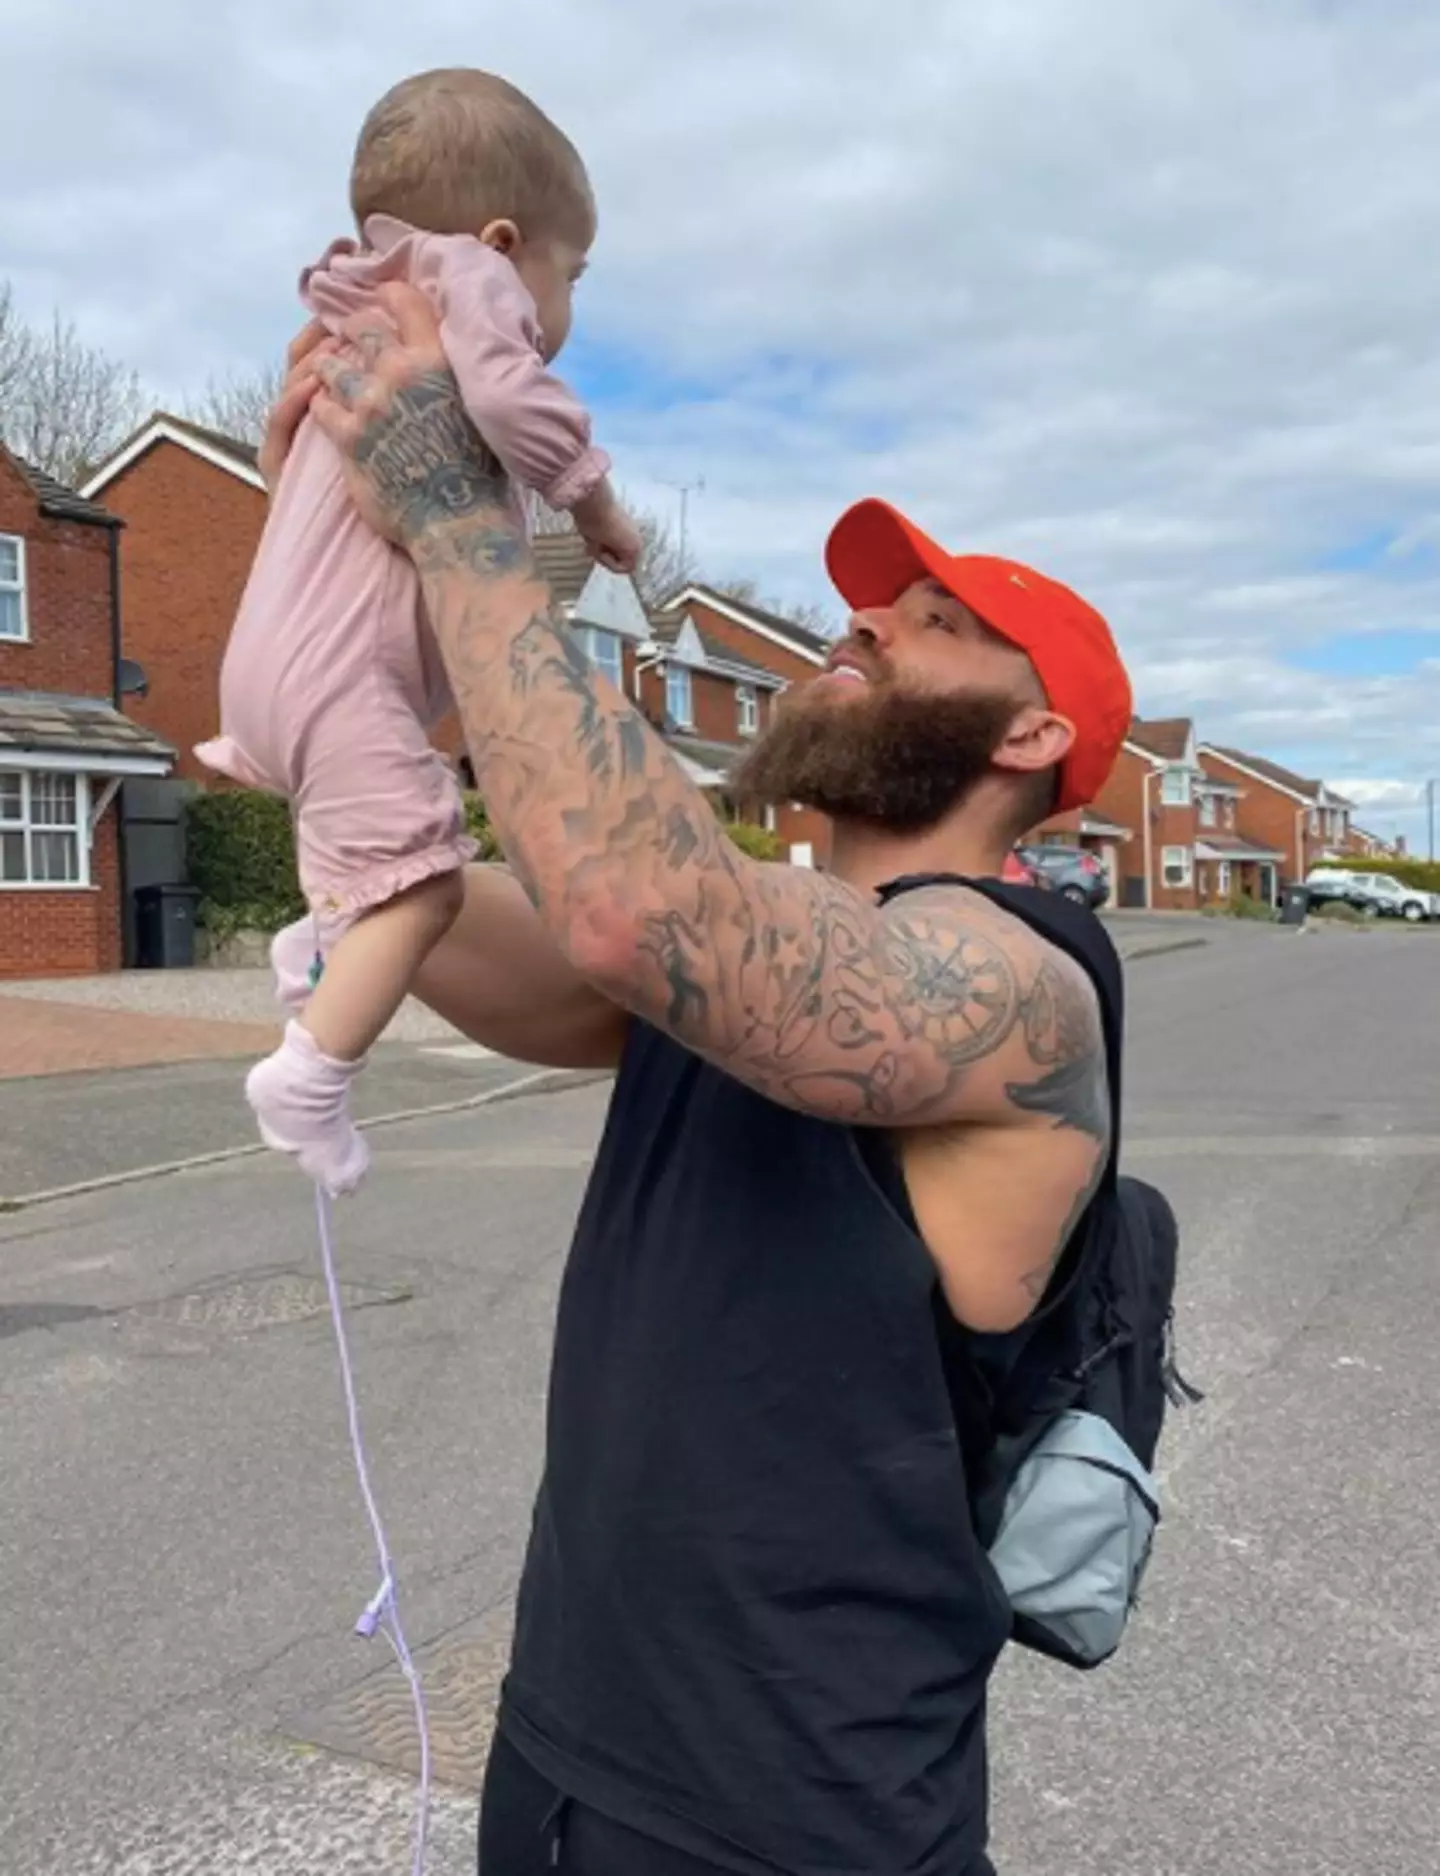 Ashley Cain has hit back at trolls who have been questioning him over money raised for his daughter Azaylia (